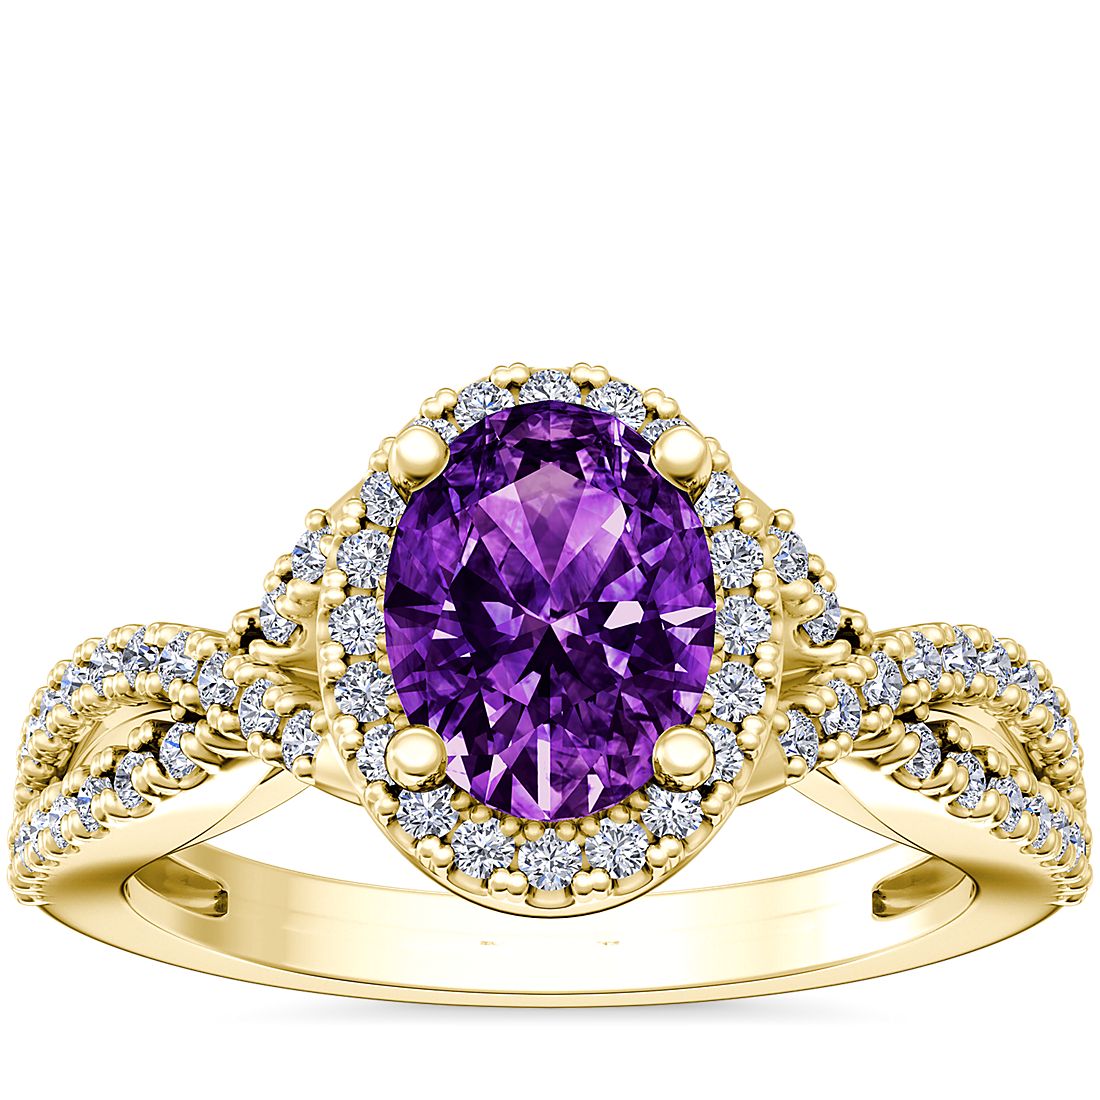 Twist Halo Diamond Engagement Ring with Oval Amethyst in 14k Yellow Gold (8x6mm)